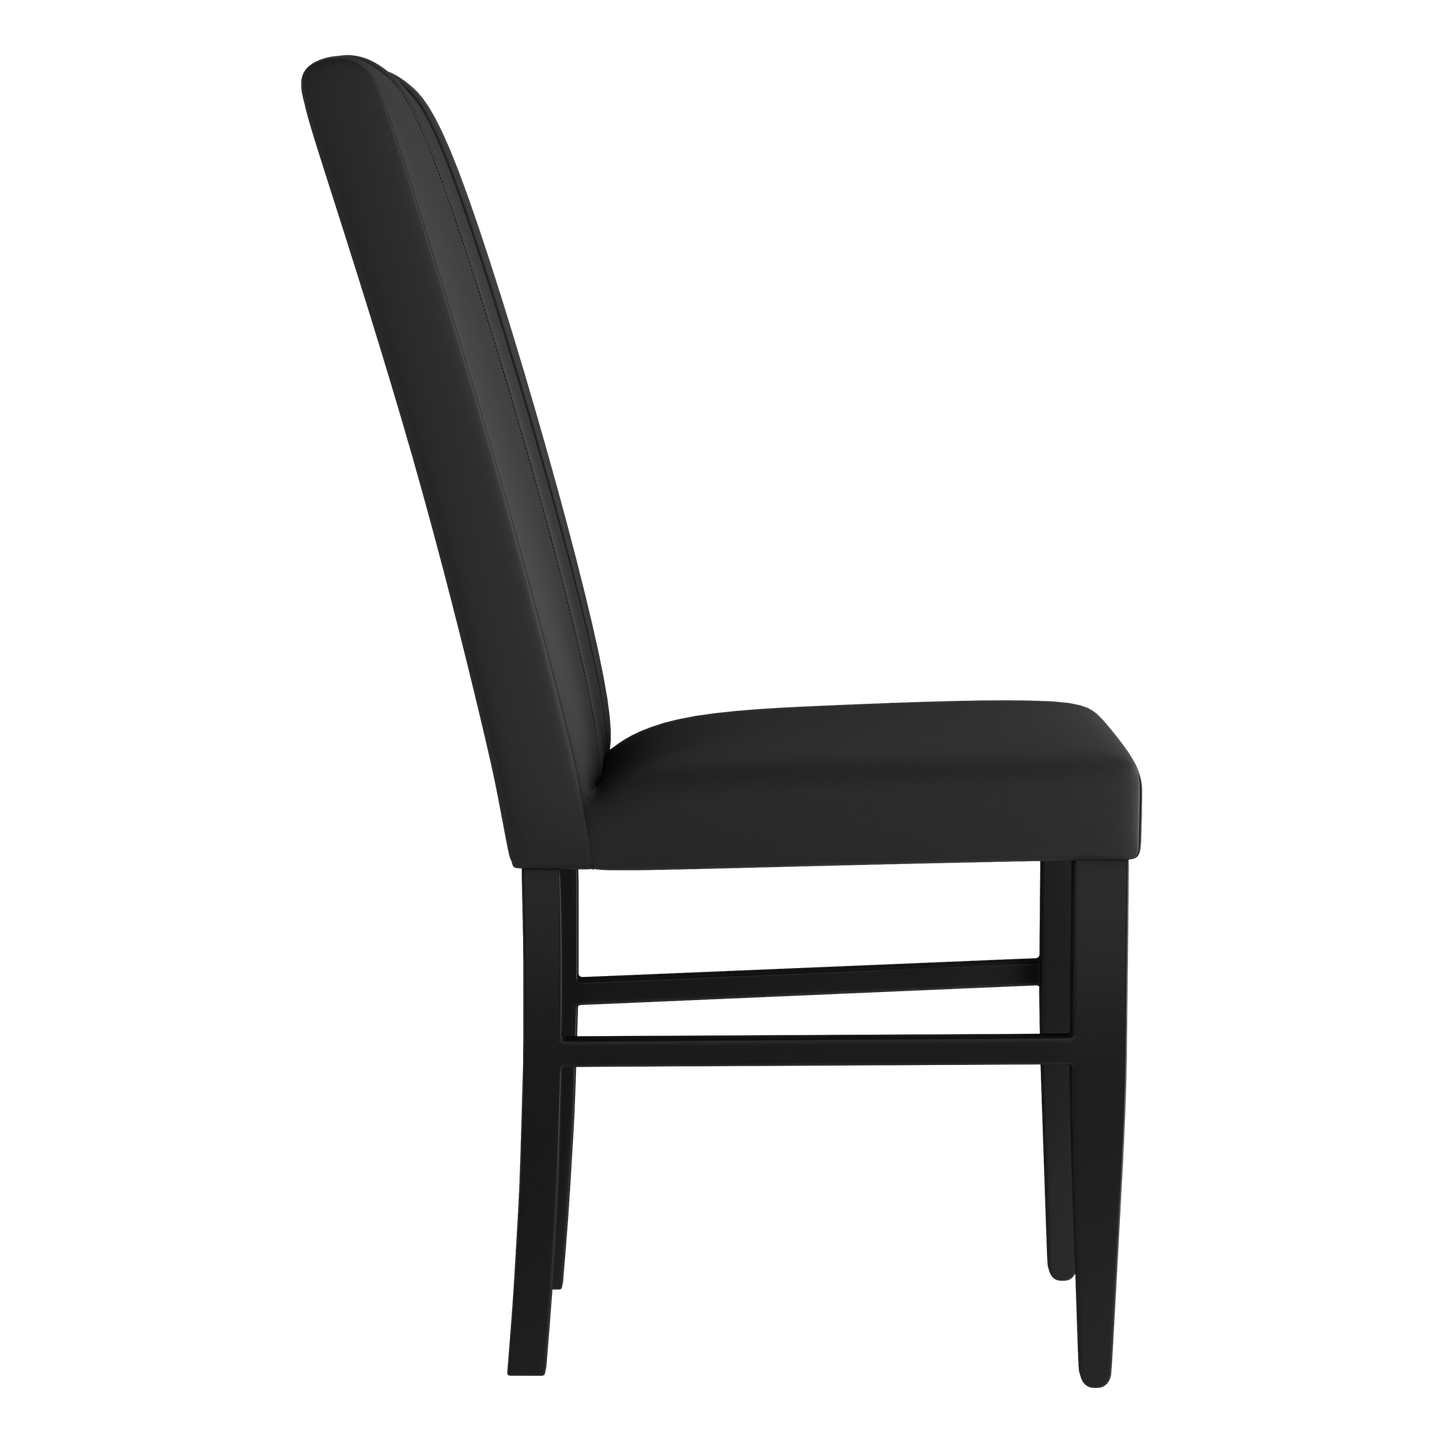 Side Chair 2000 with Las Vegas Raiders Classic Logo Set of 2